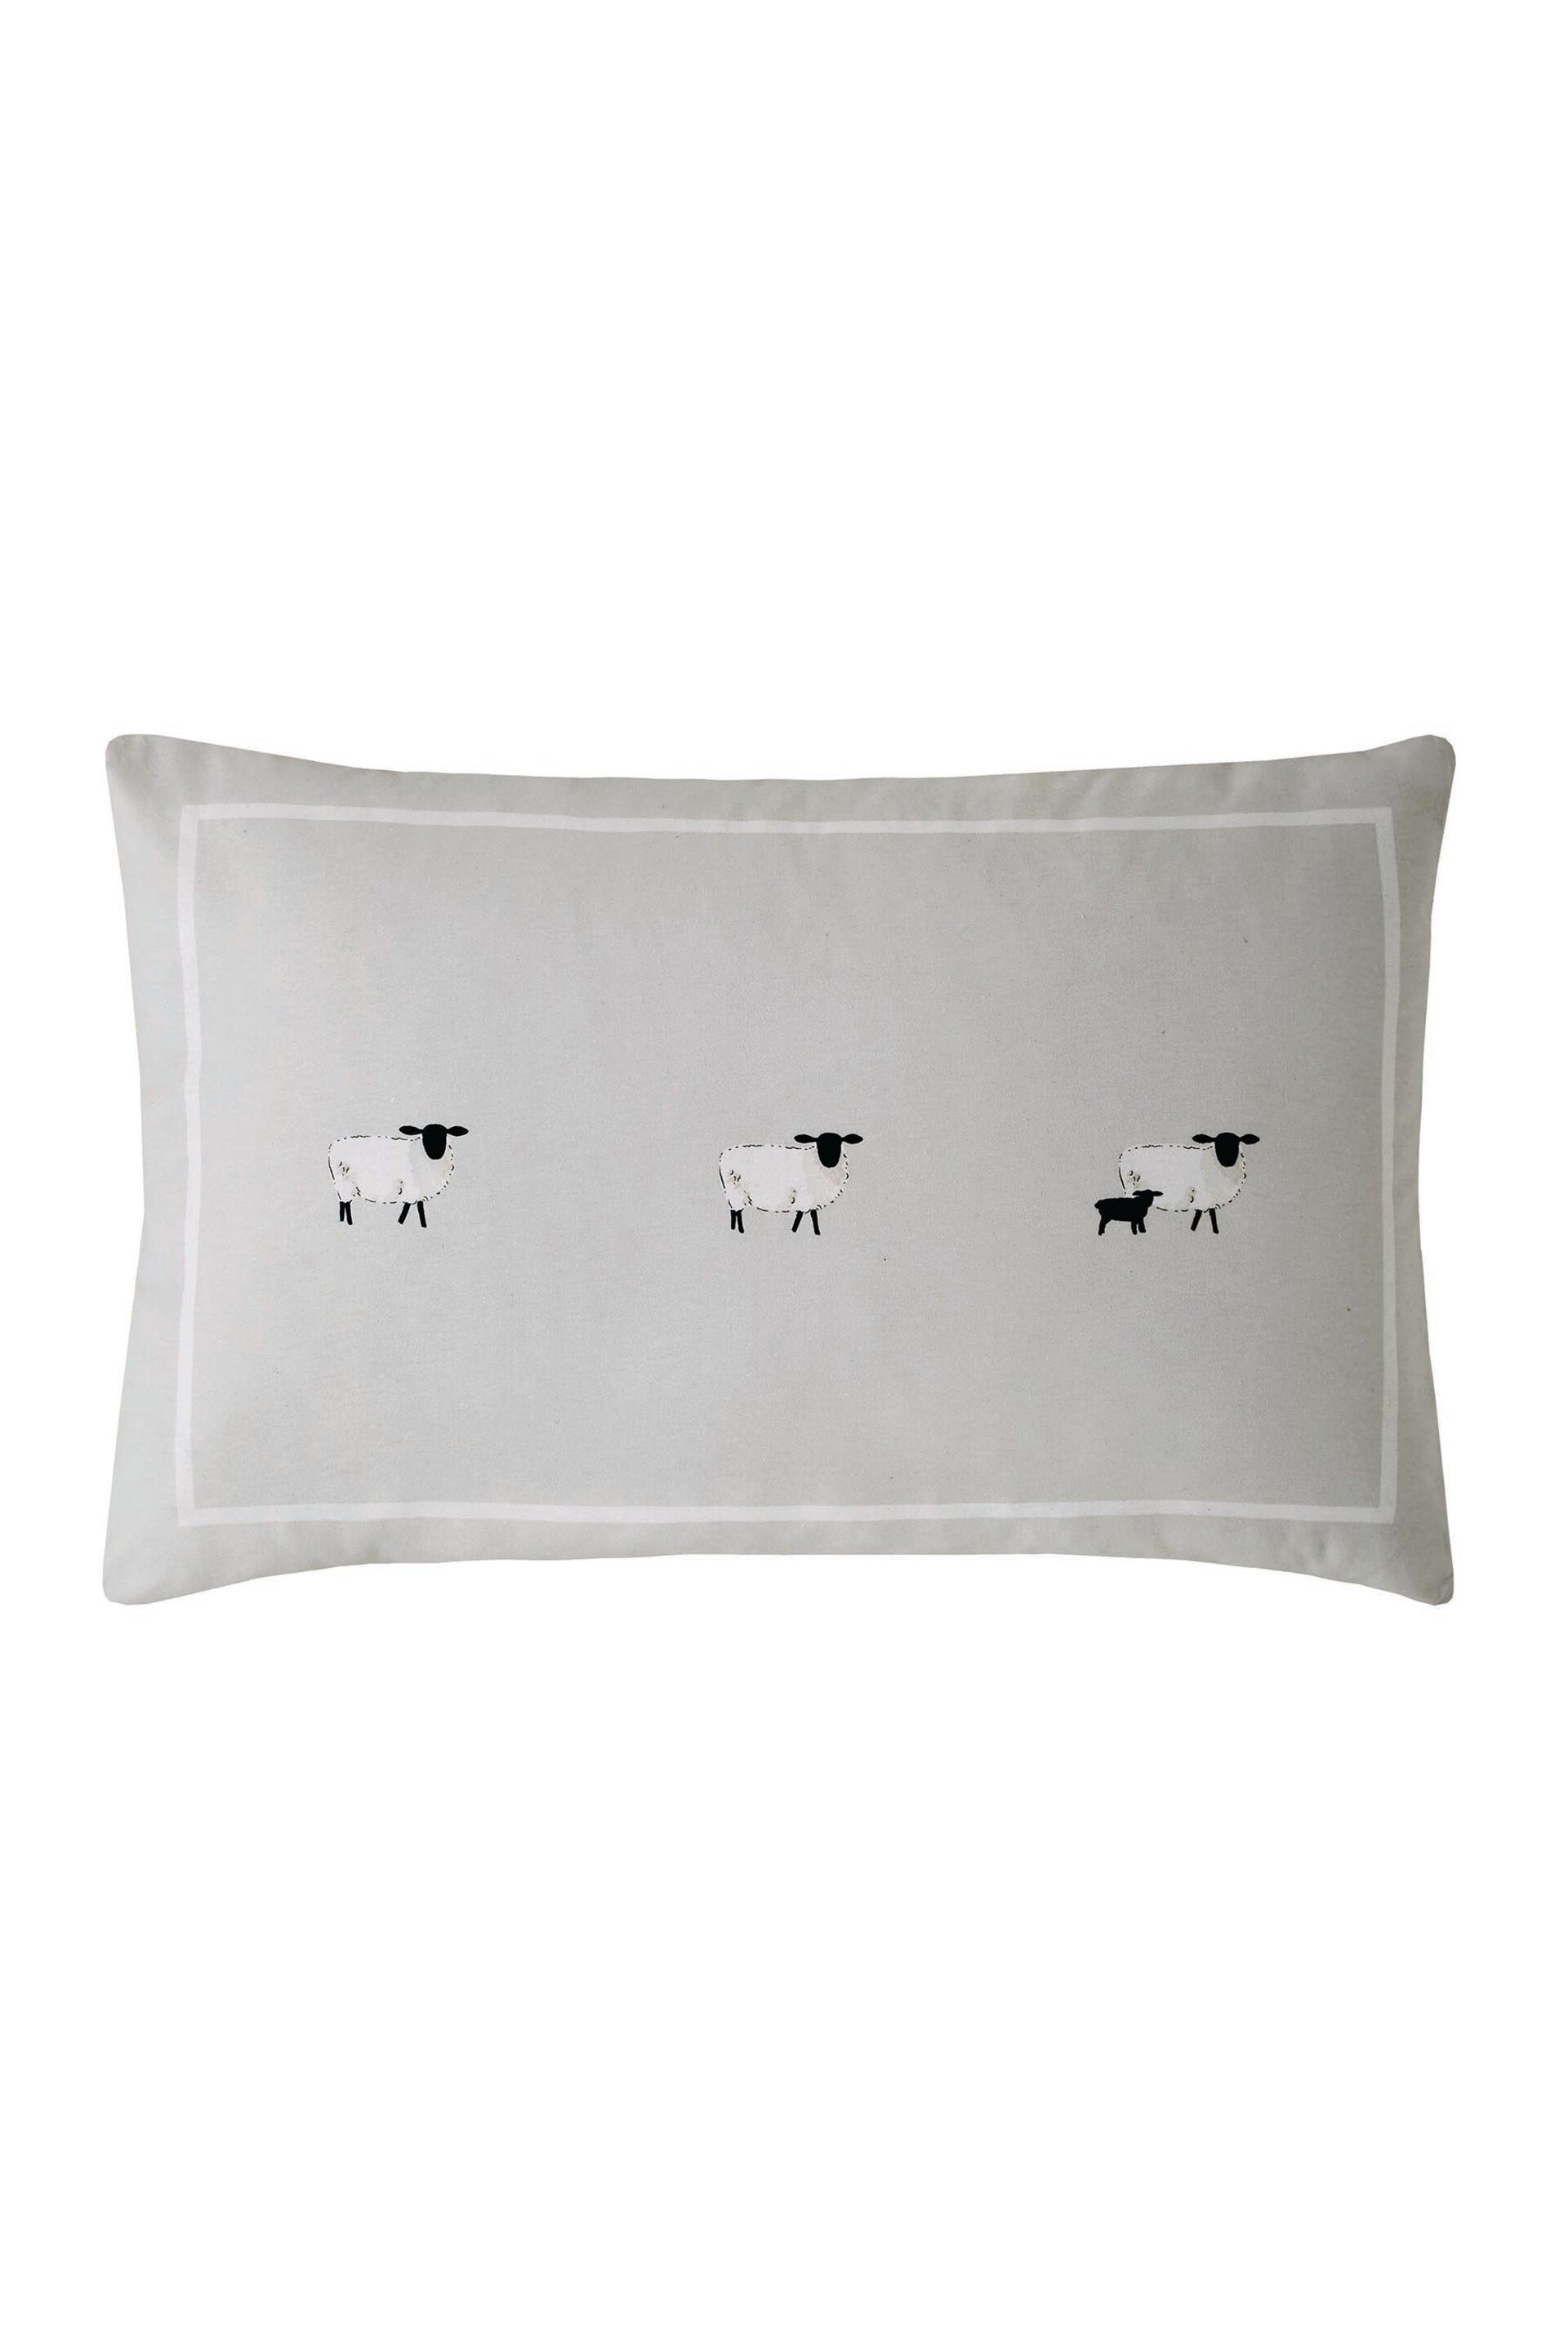 Sophie Allport Oatmeal Sheep Cotton Duvet Cover And Pillowcase Set - Image 4 of 5